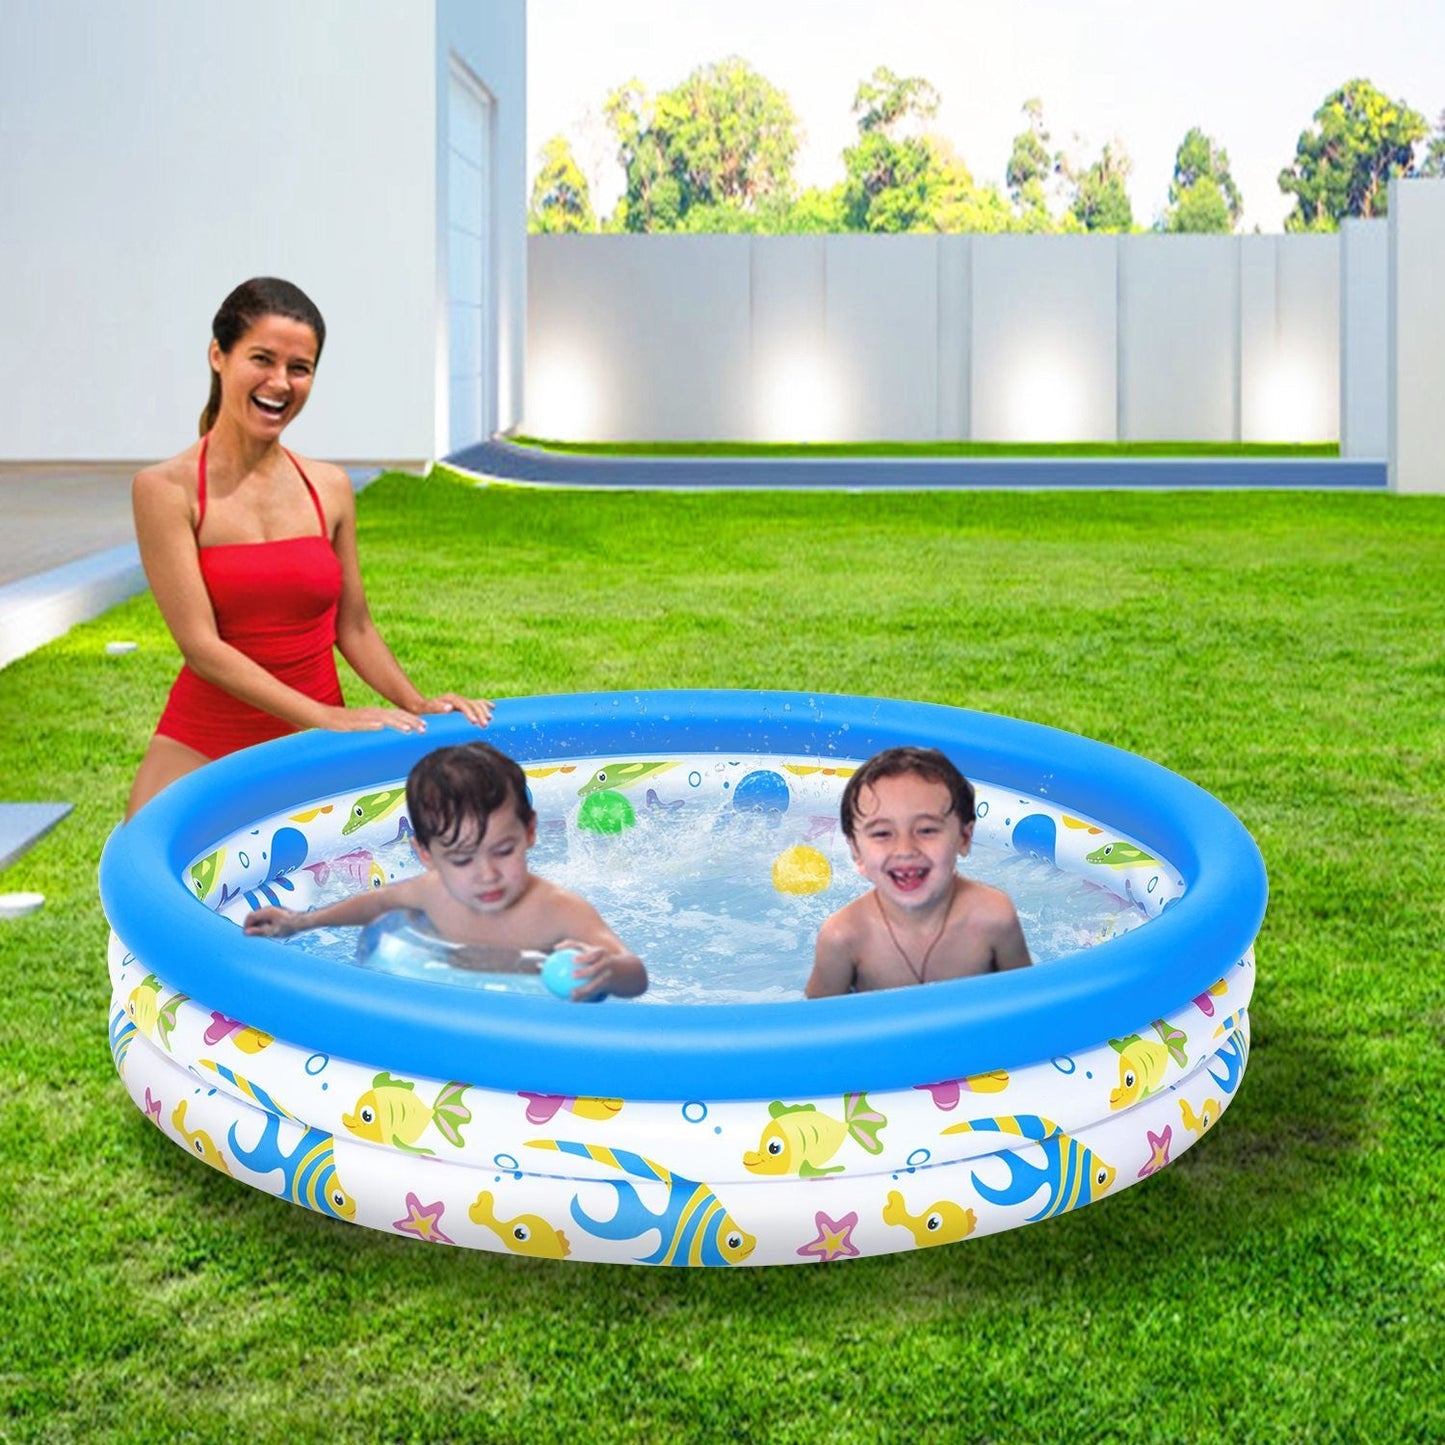 48x10In Inflatable Swimming Pool Blow Up Family Pool For 2 Kids